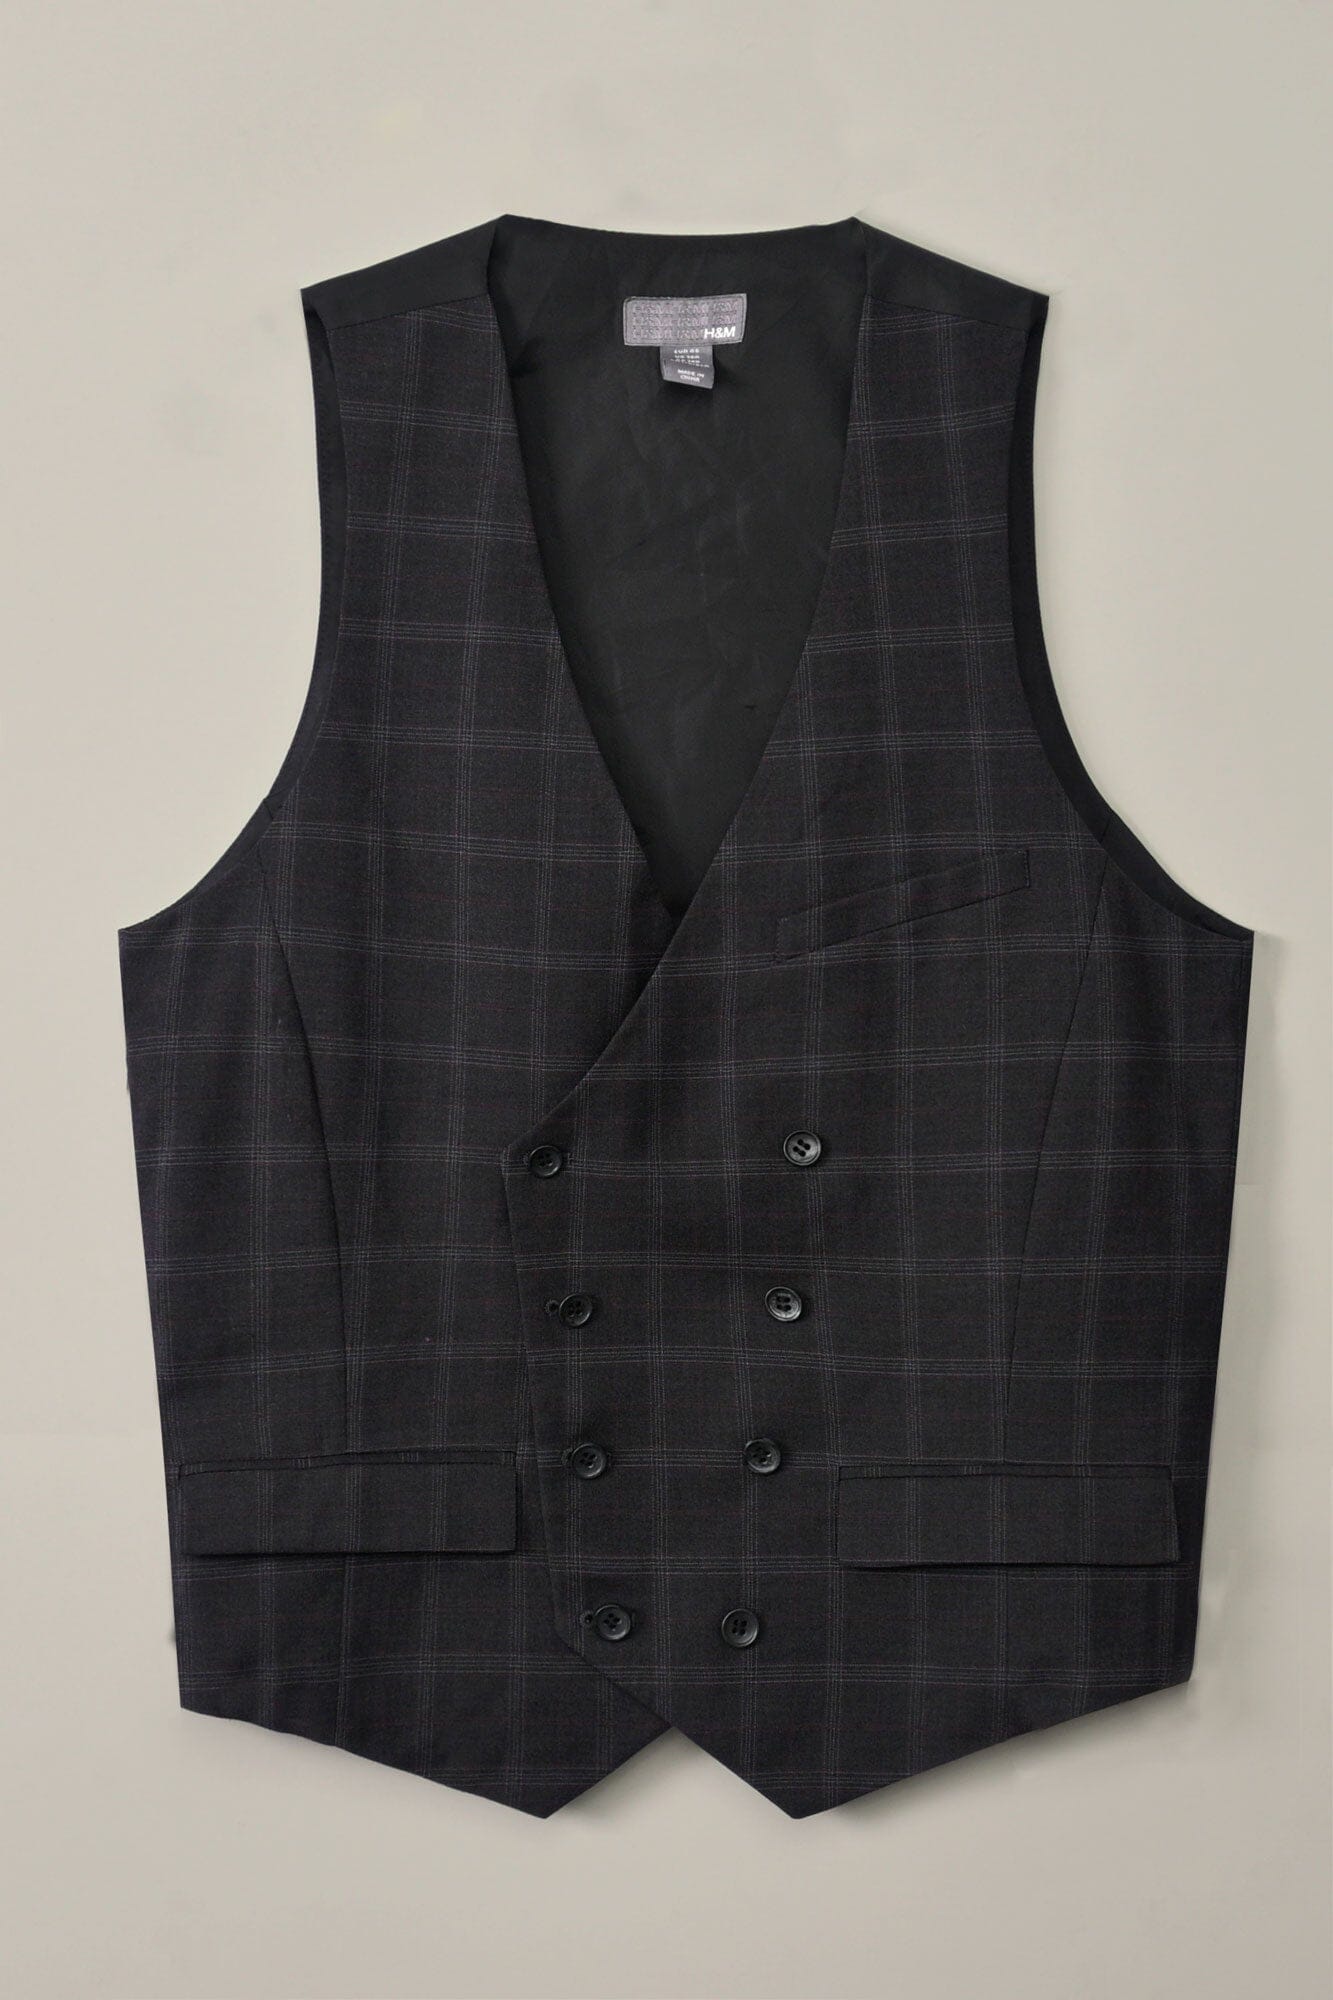 HM Women's Authentic Checked Waistcoat with Pockets 🧥🕴️🔥 Women's Waistcoat First Choice 